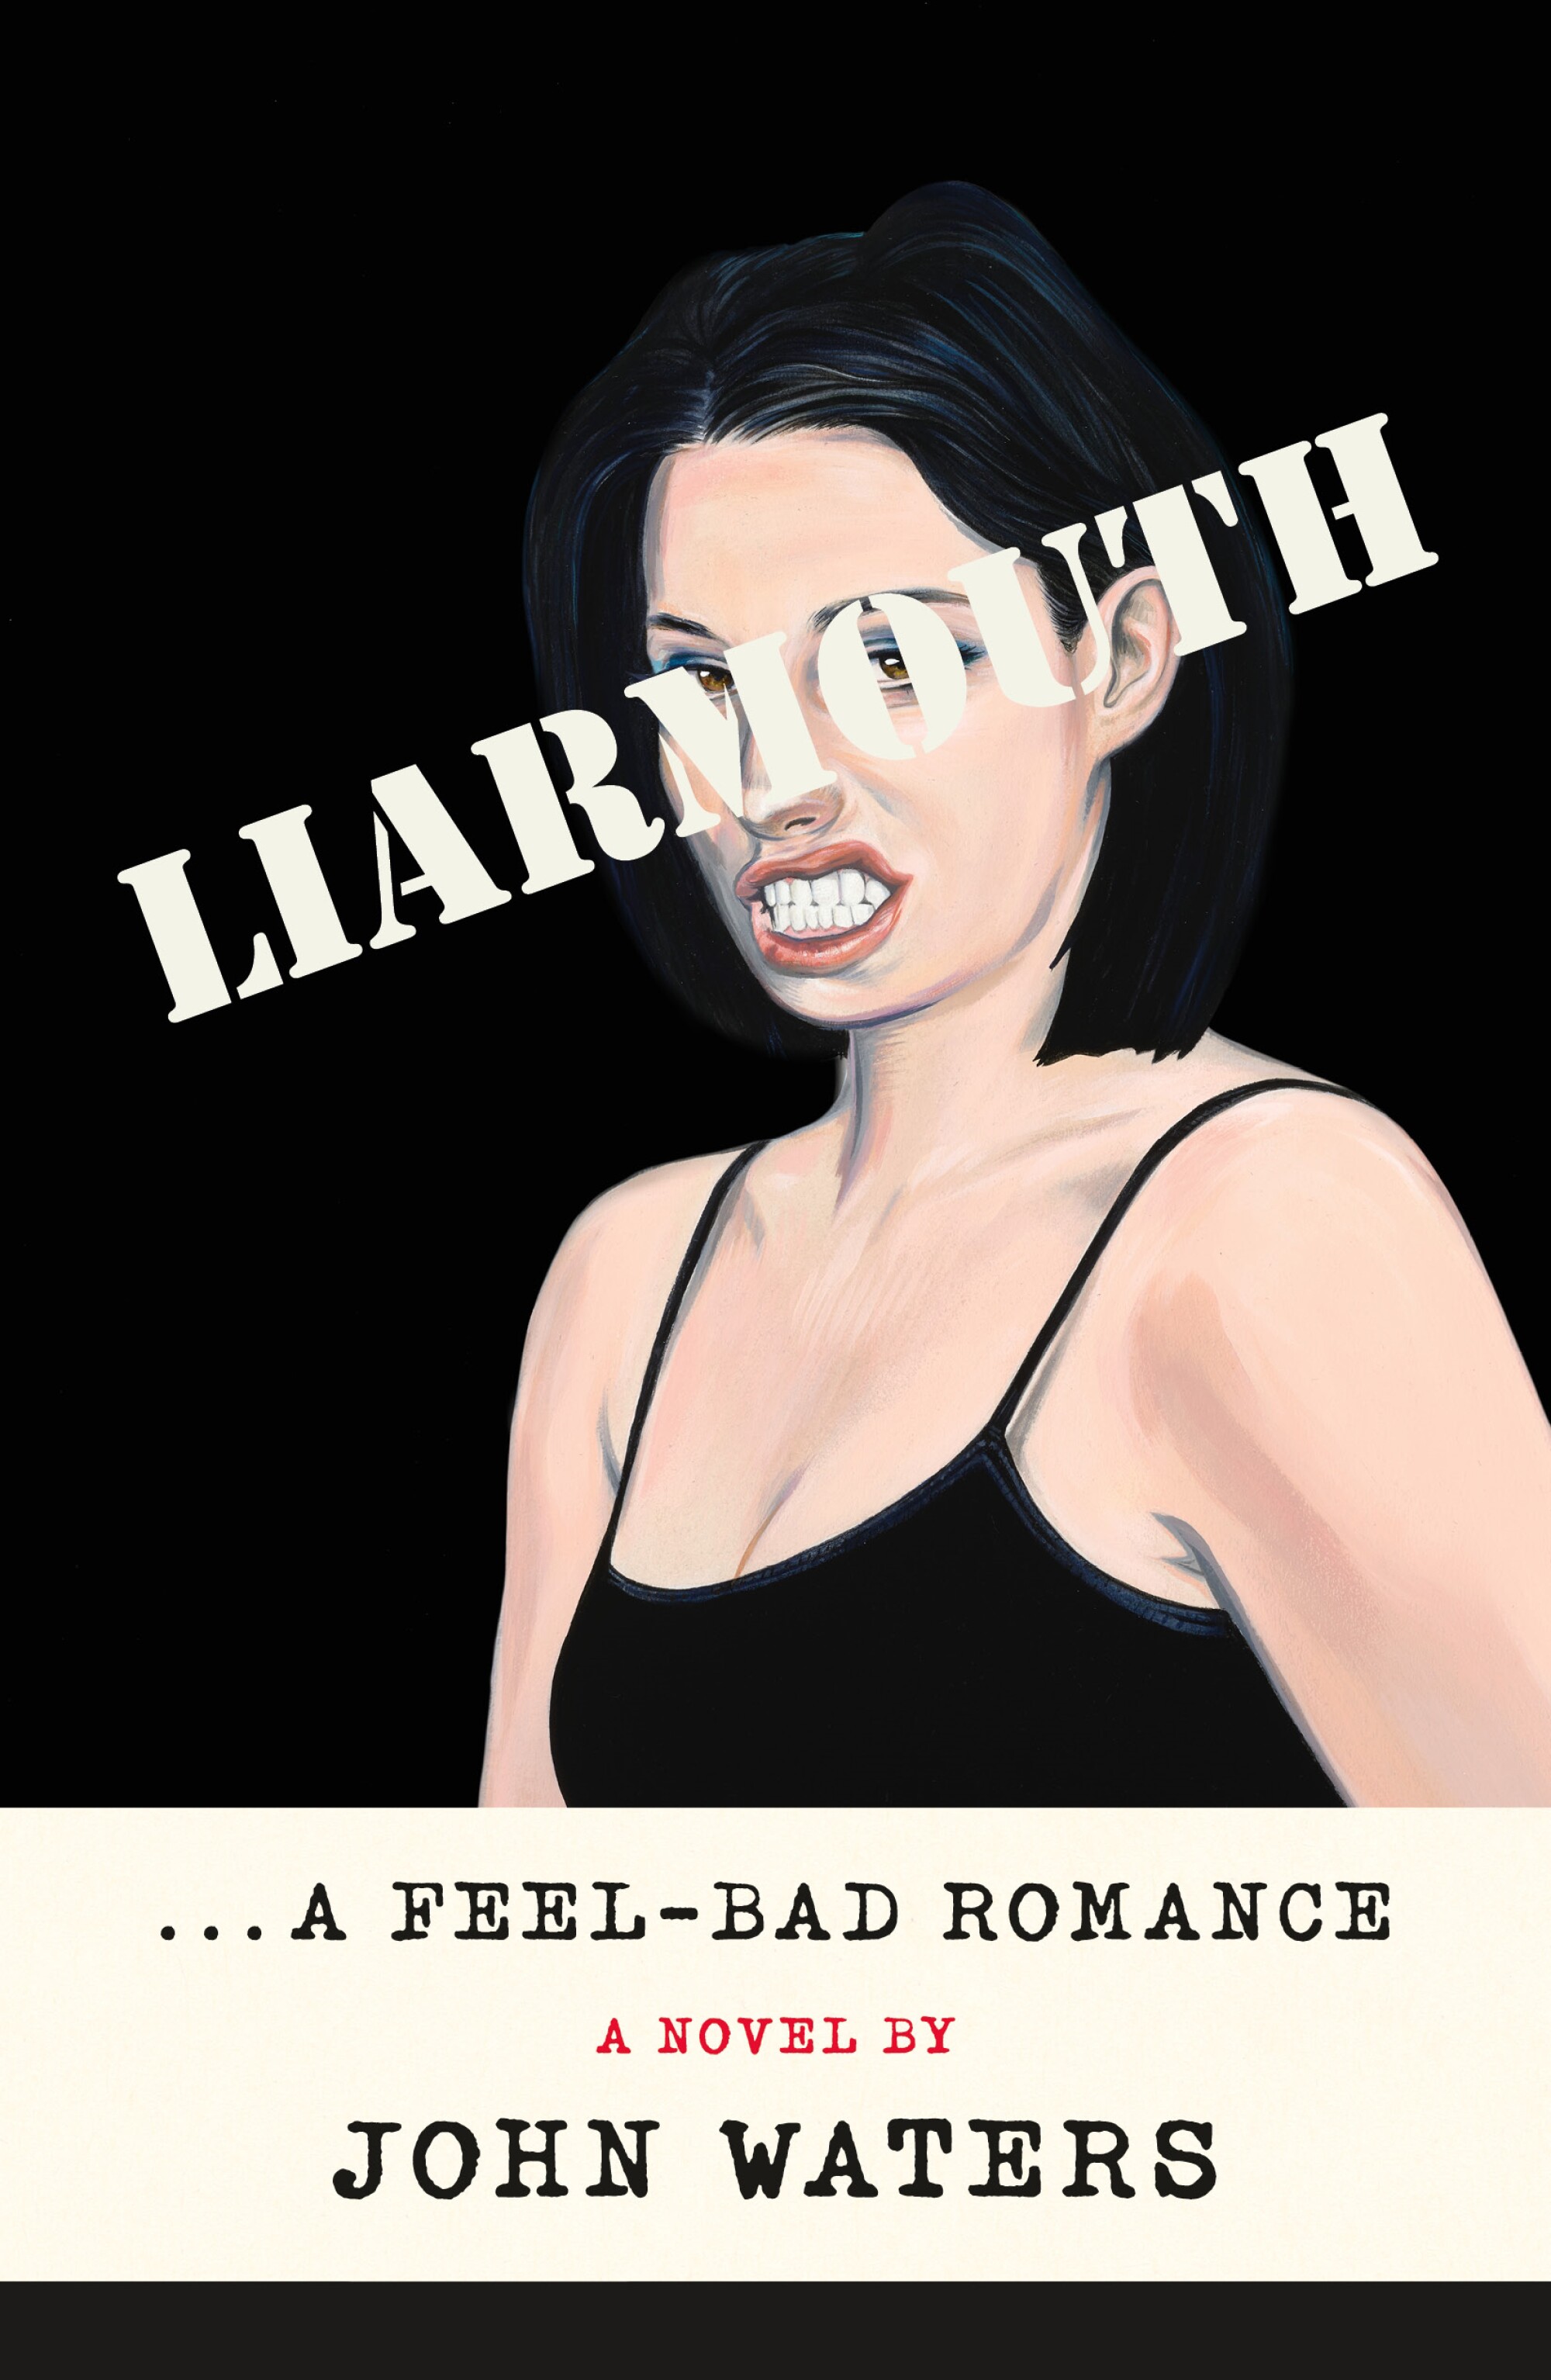 "Liarmouth: A Feel-Bad Romance" by John Waters